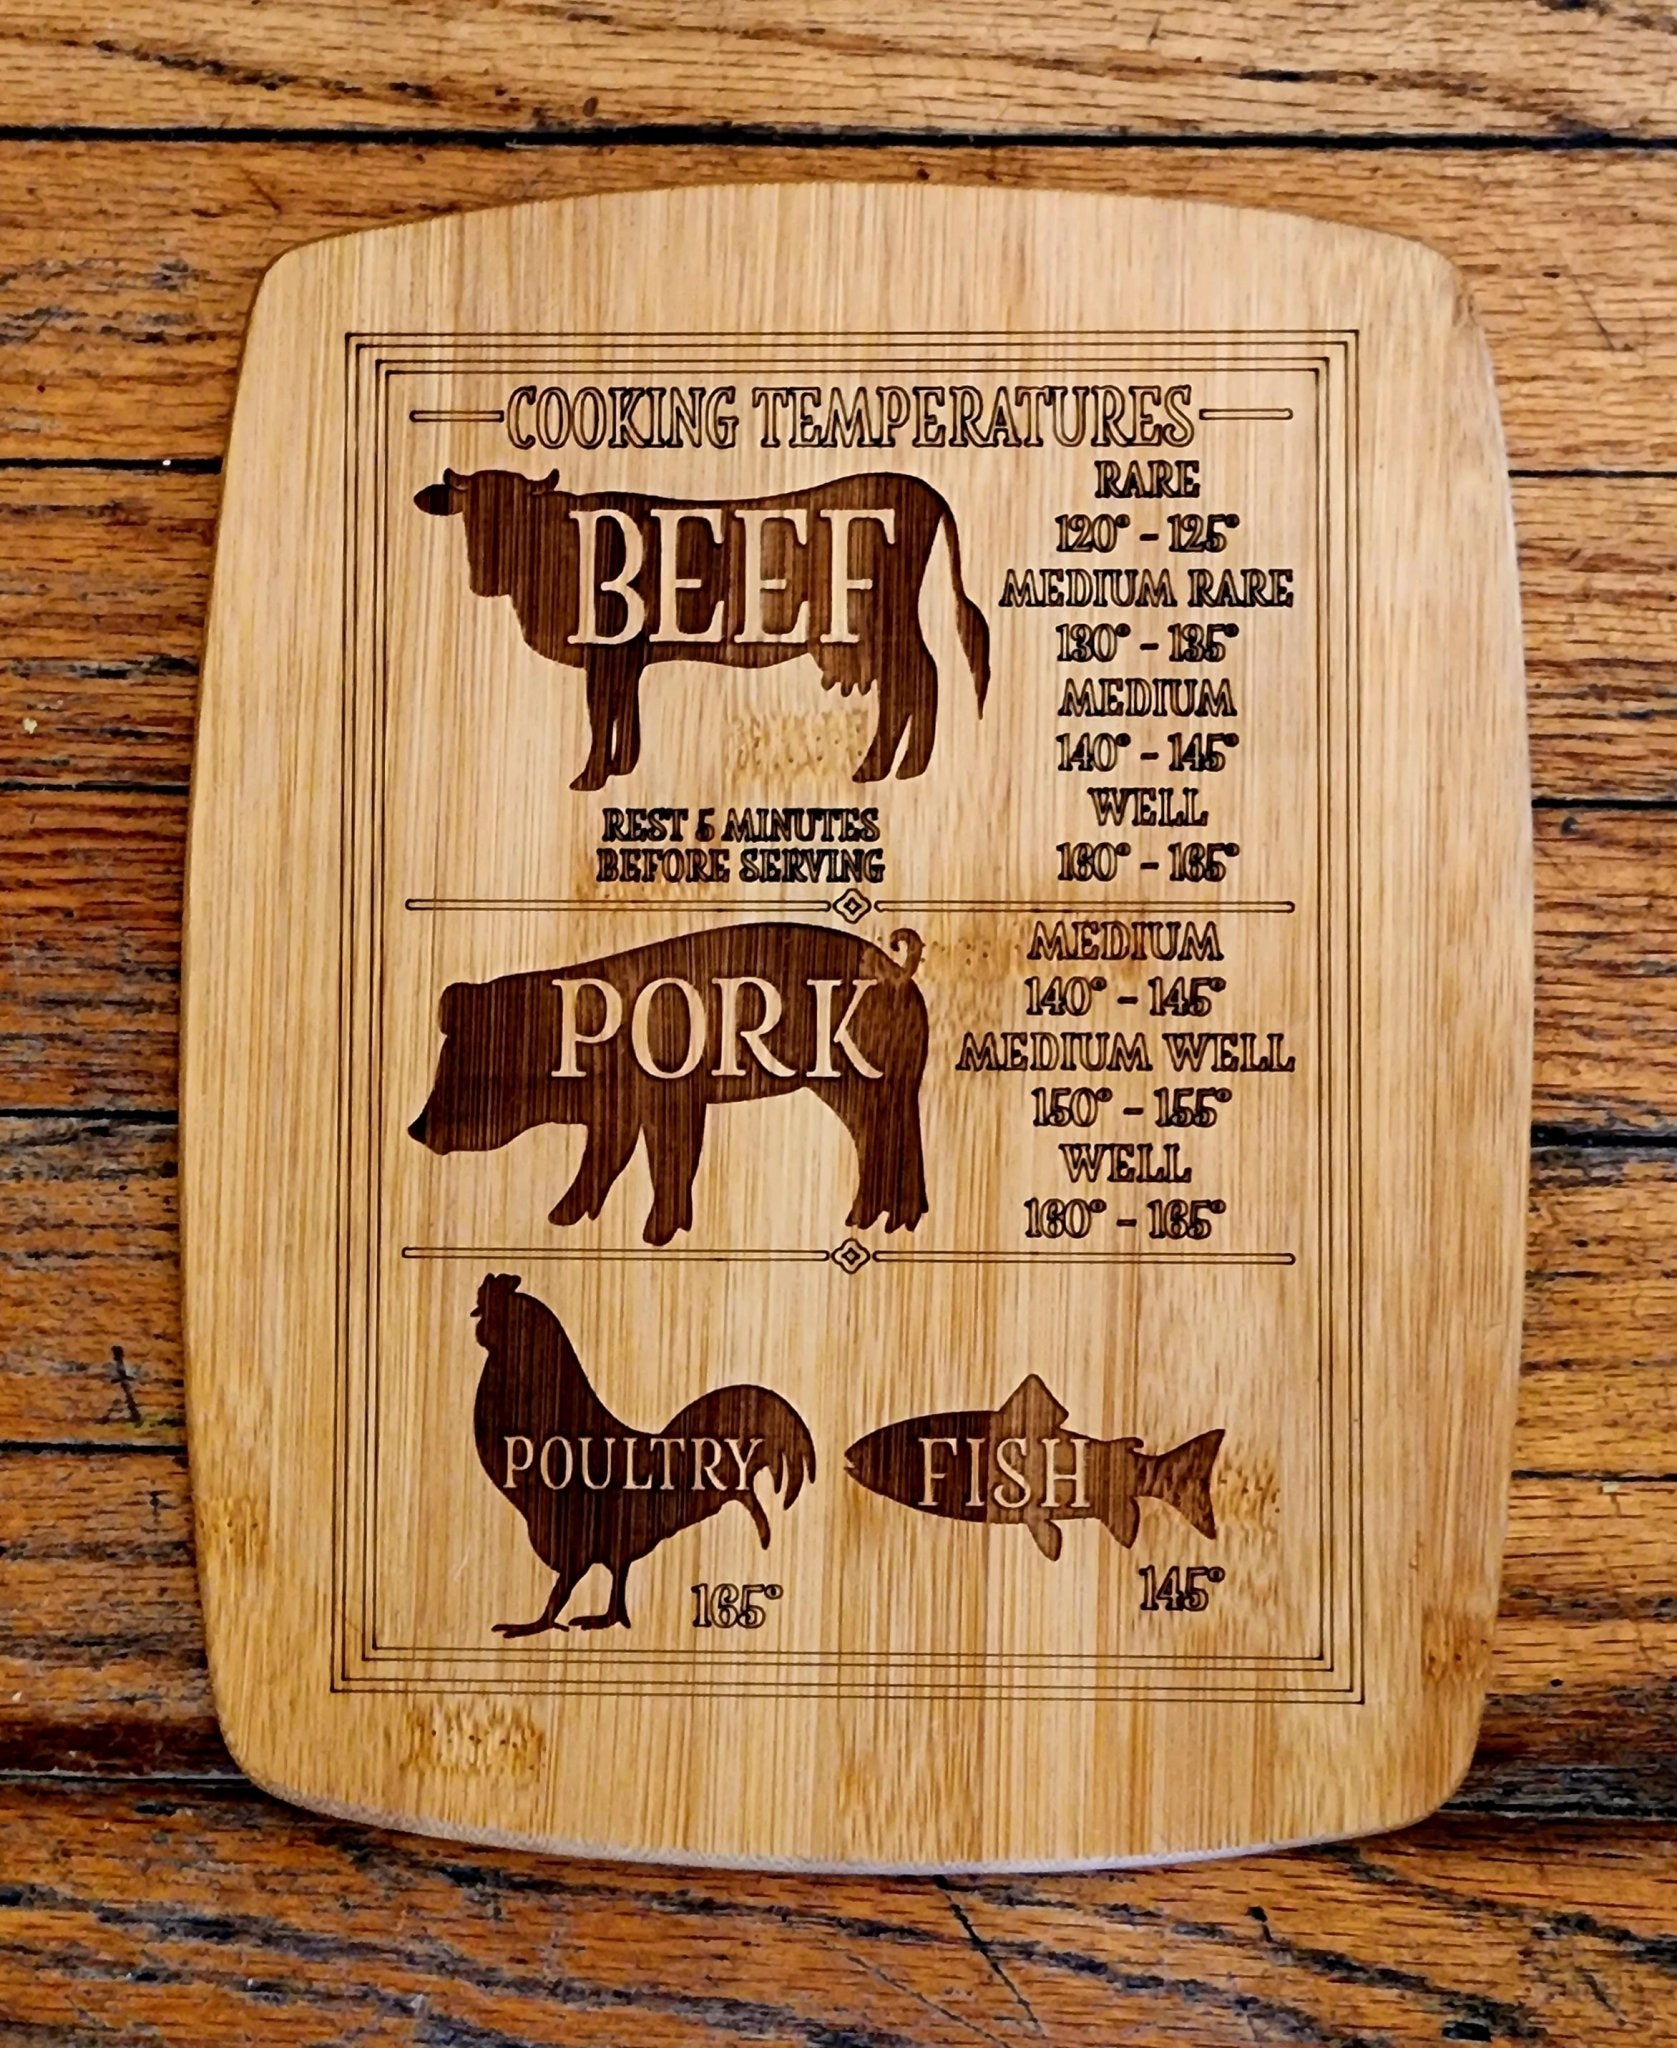 Personalized Wooden Cutting Board For Mother's Day